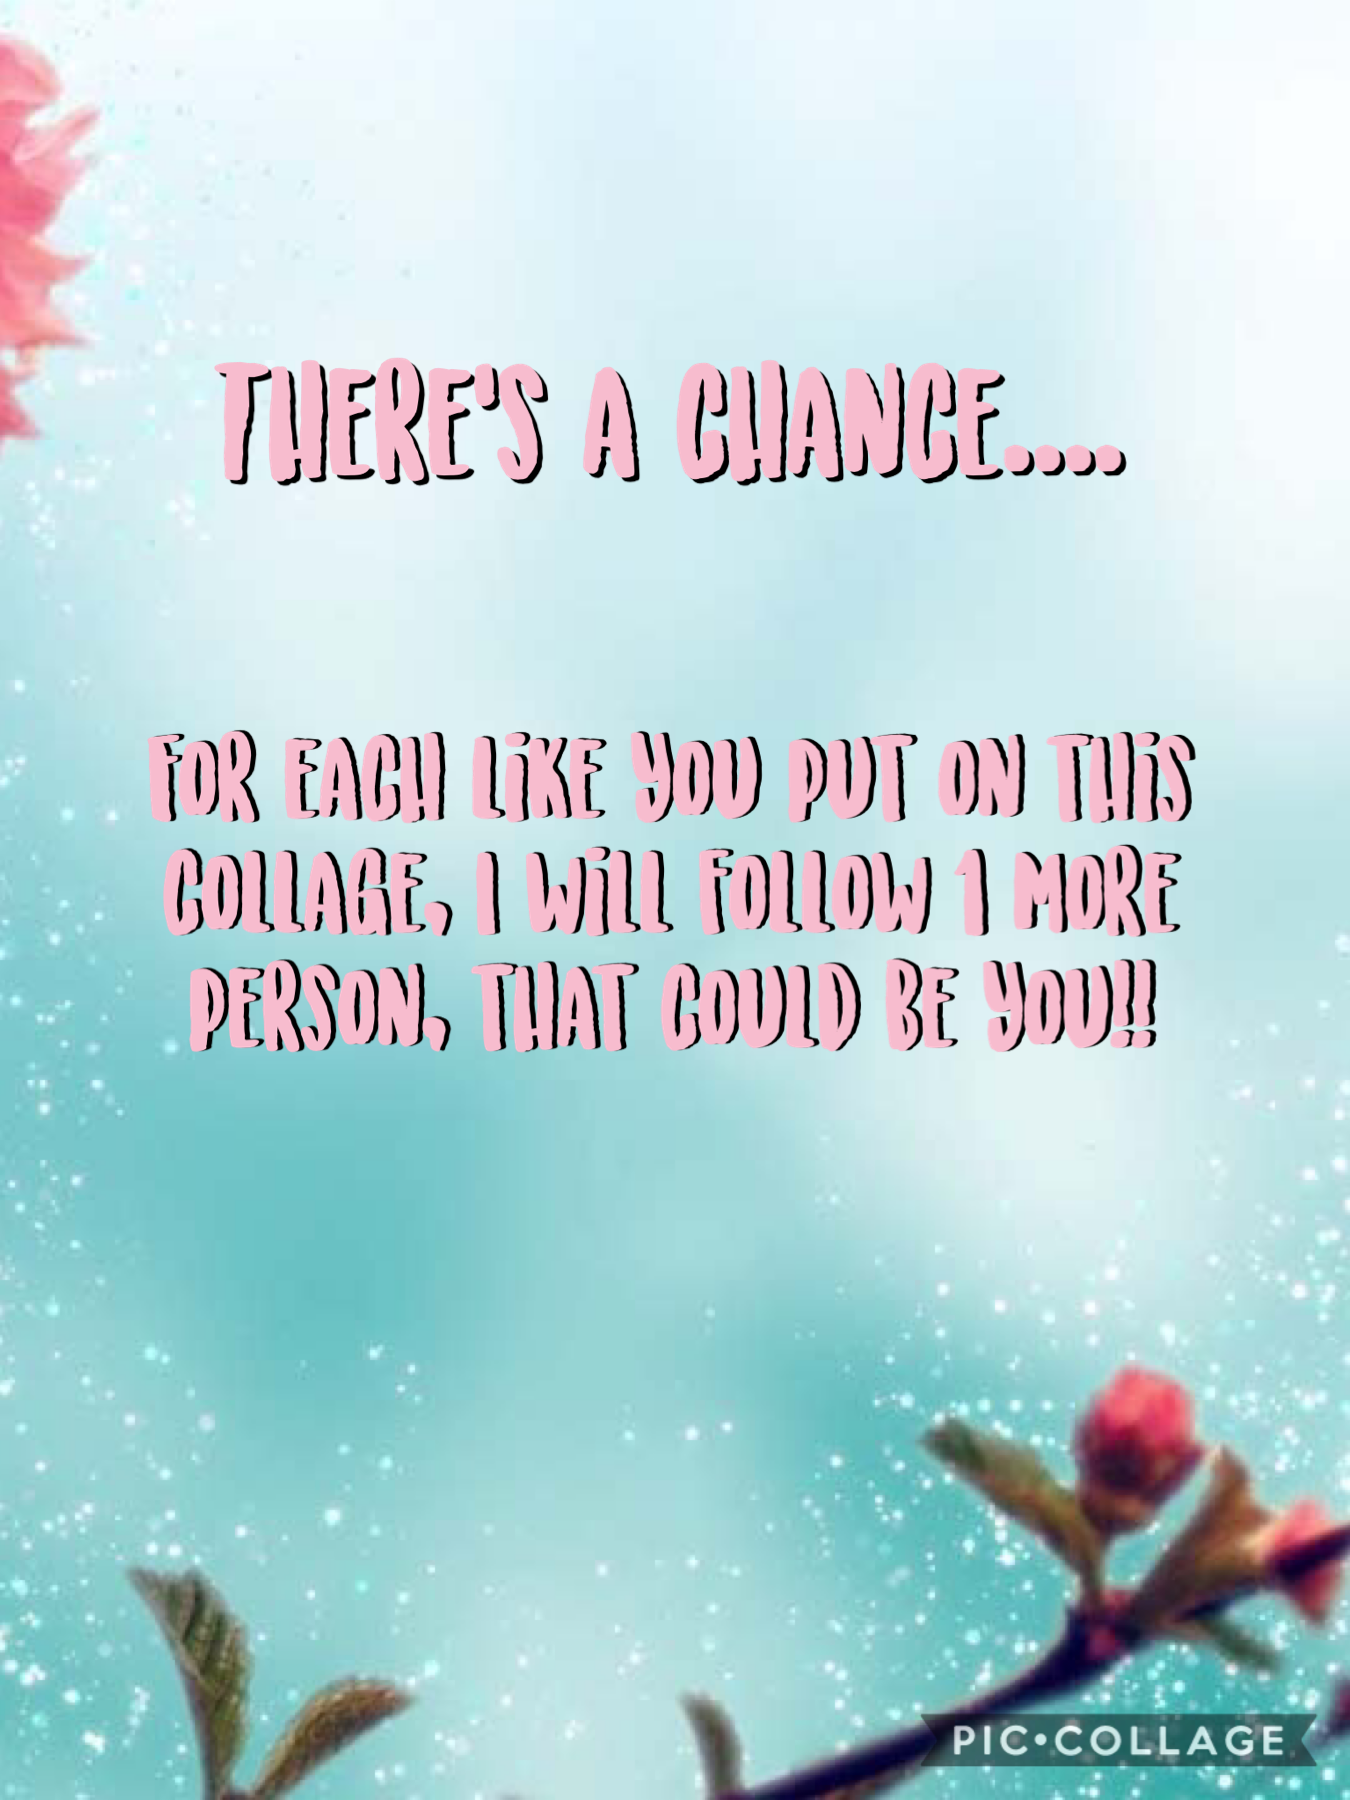 There is ALWAYS a chance :)